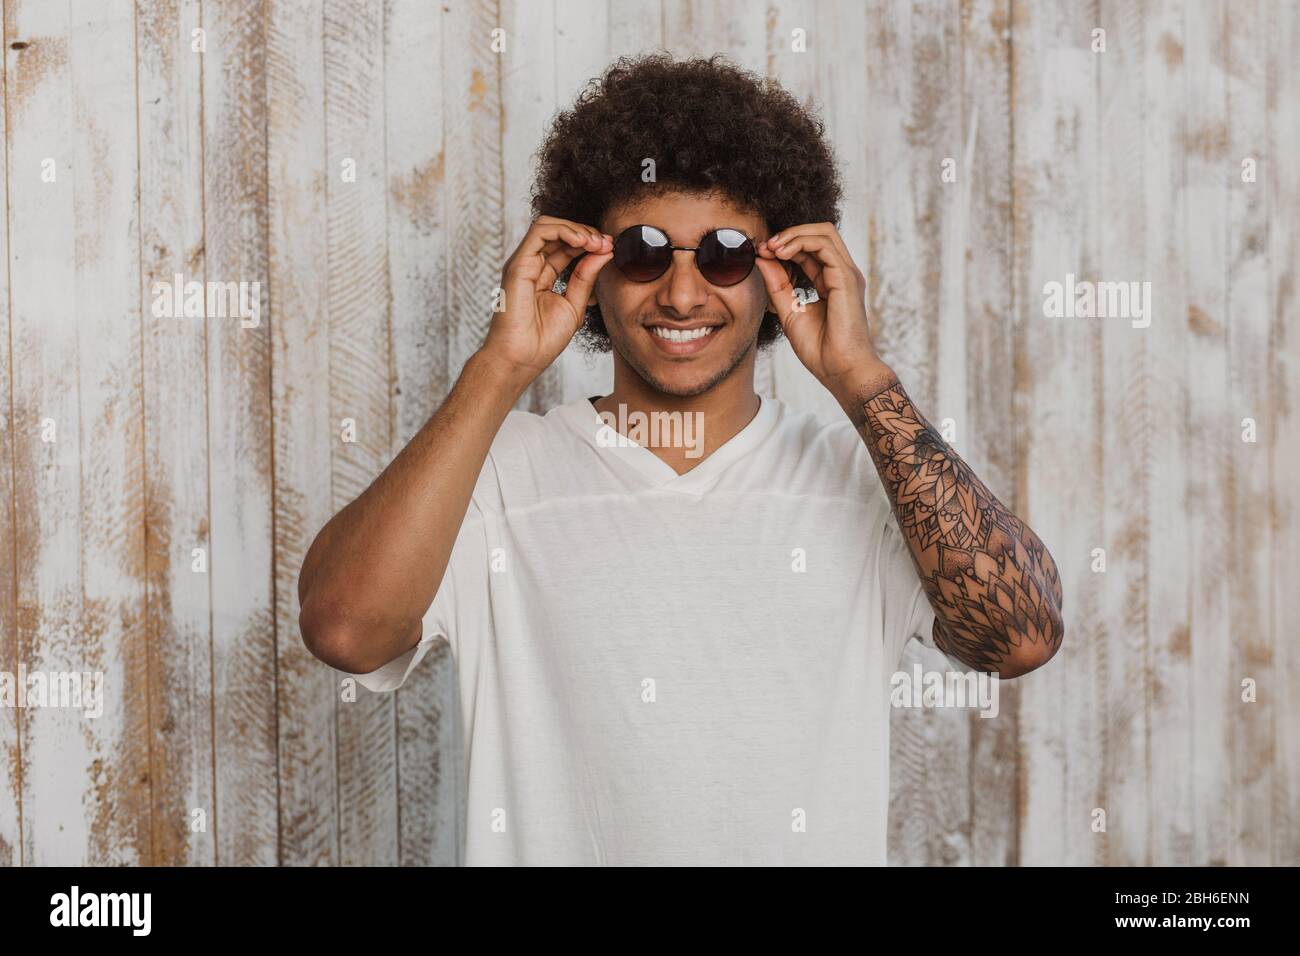 Choose a fashionable summer accessory! Portrait man with stylish hairstyle and perfect smile adjusting his sunglasses. While standing against old wood Stock Photo